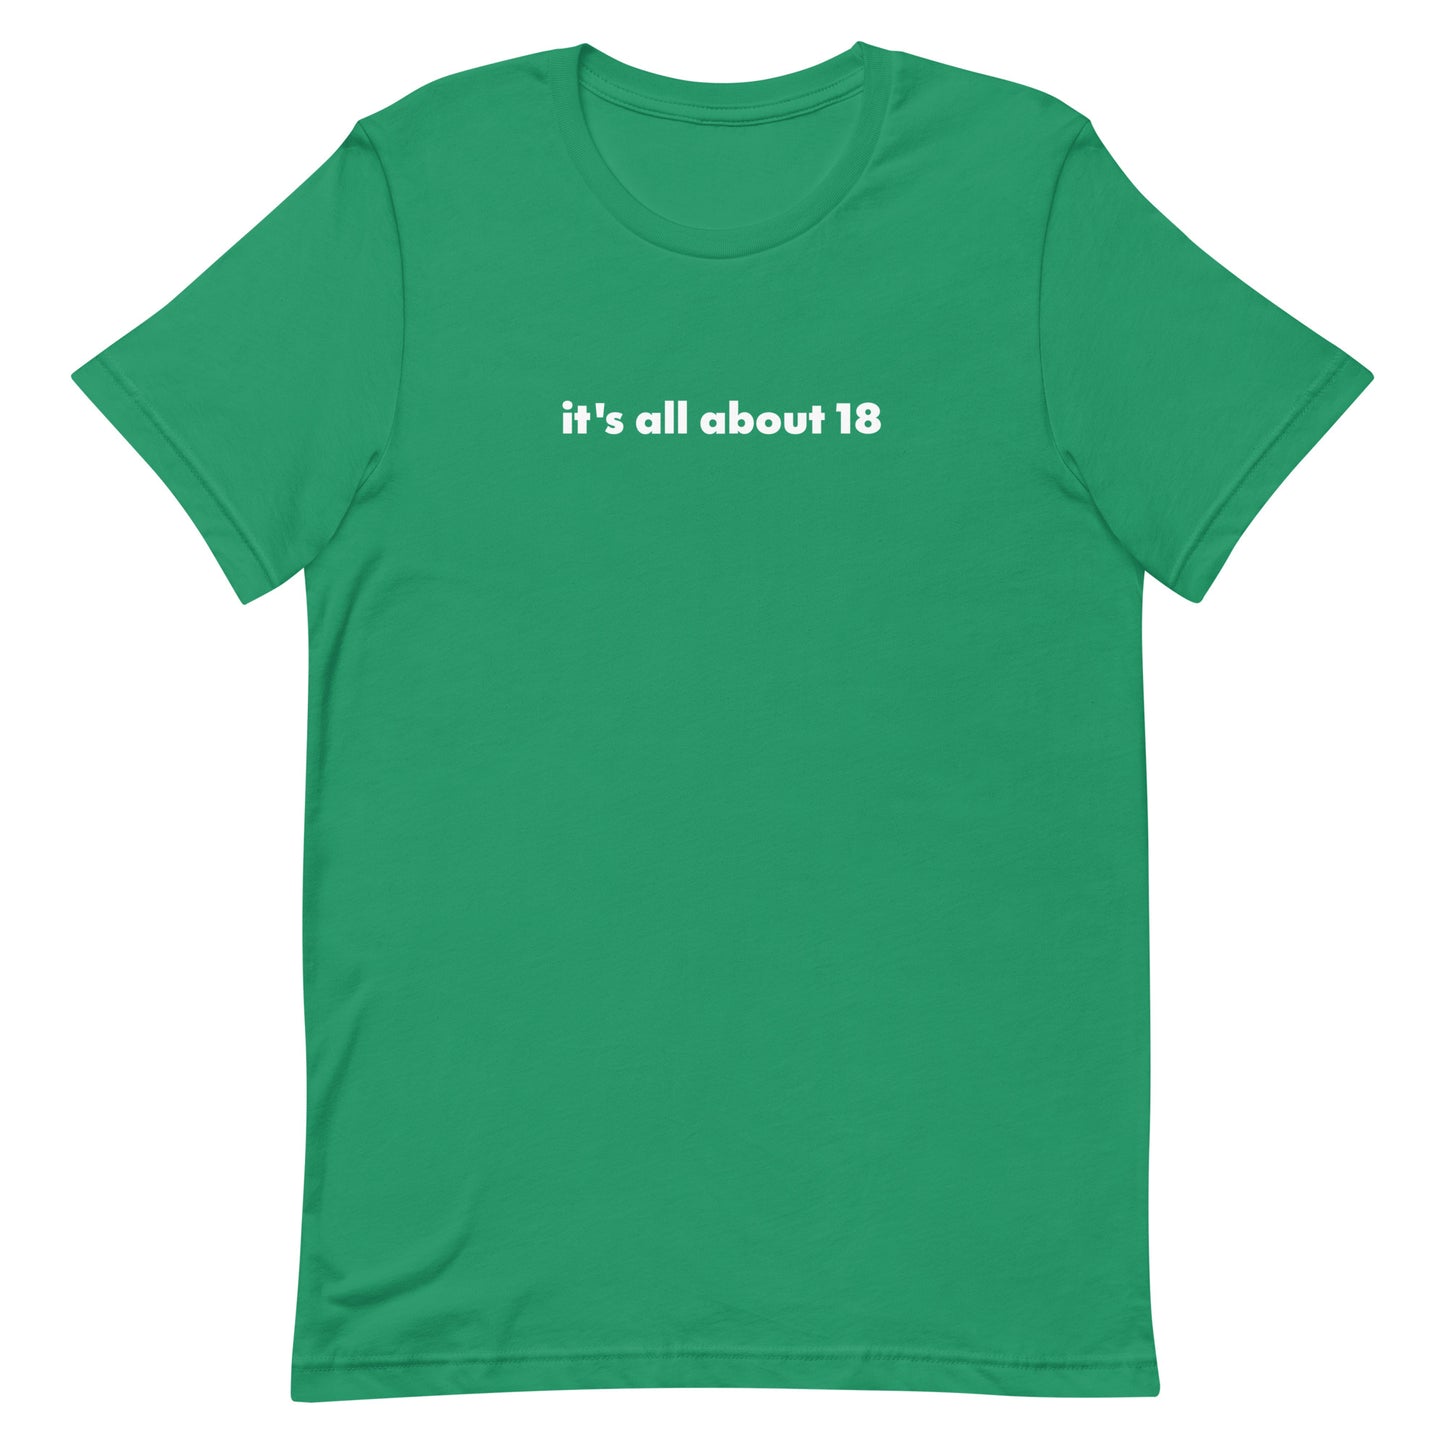 all about 18 t-shirt